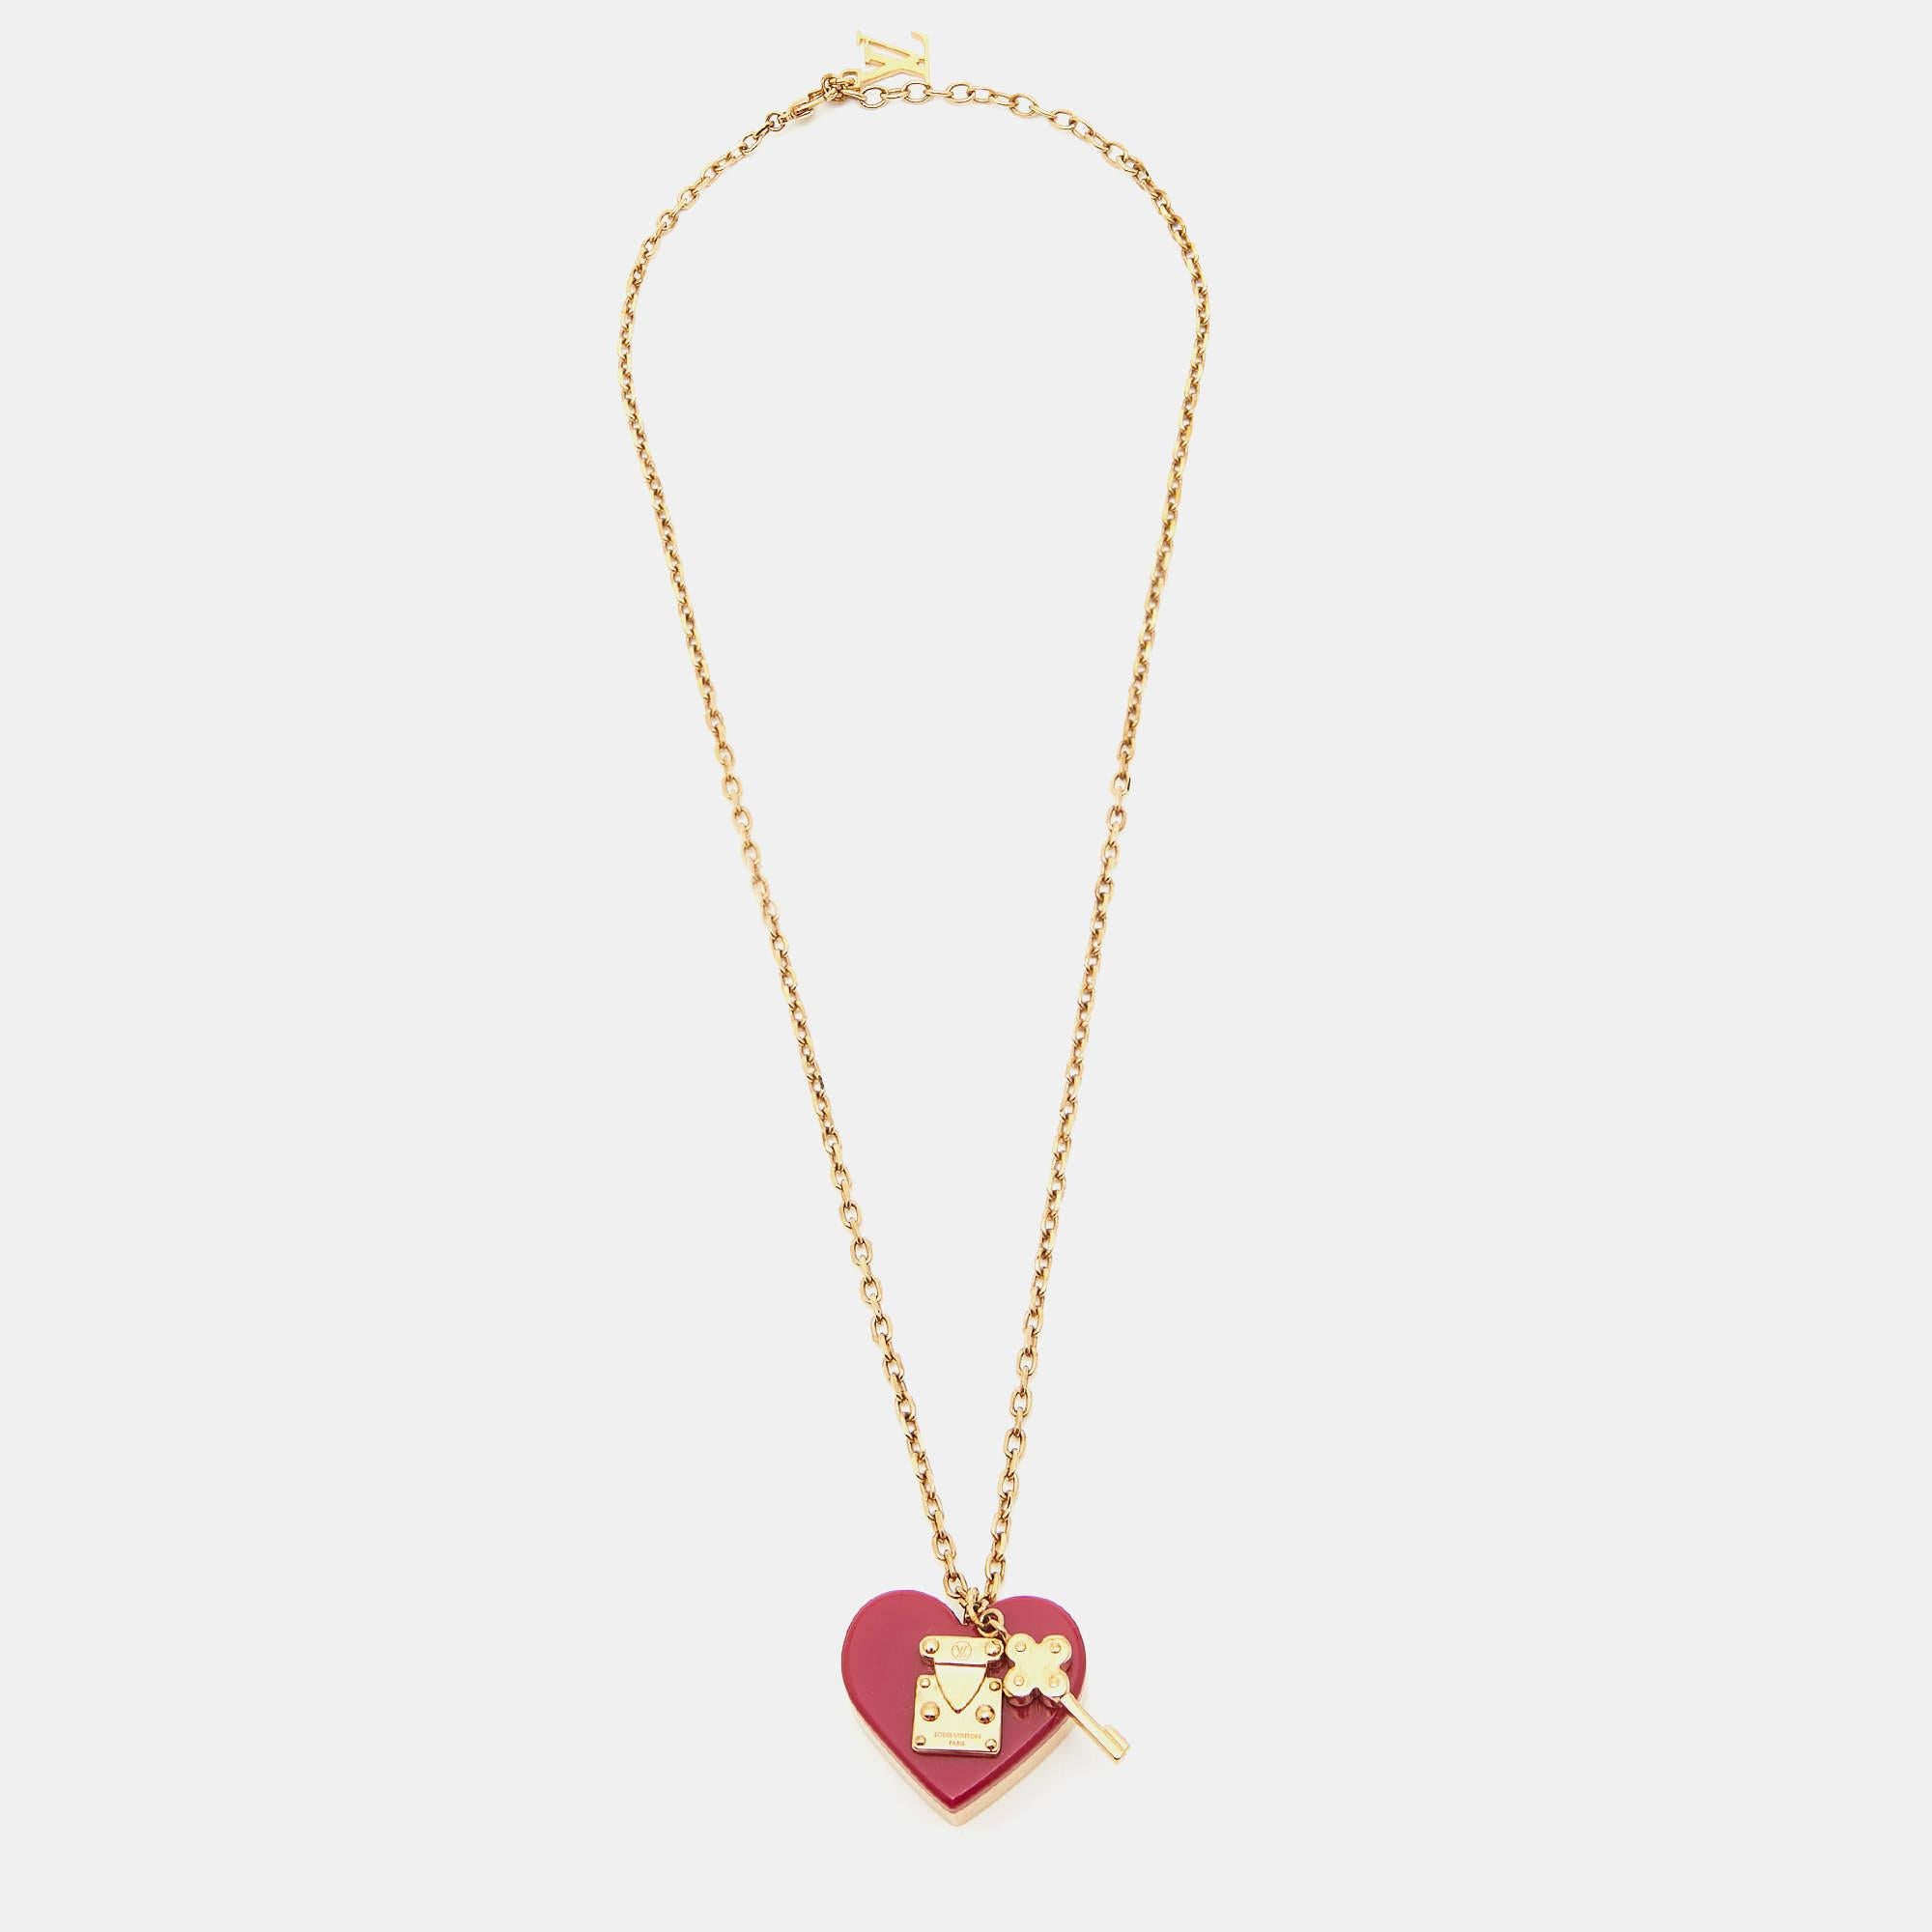 This lovely pendant necklace from Louis Vuitton is sure to become one of your favorite accessories! It comes crafted from gold-tone metal, and the chain carries a heart lock and key pendant.

